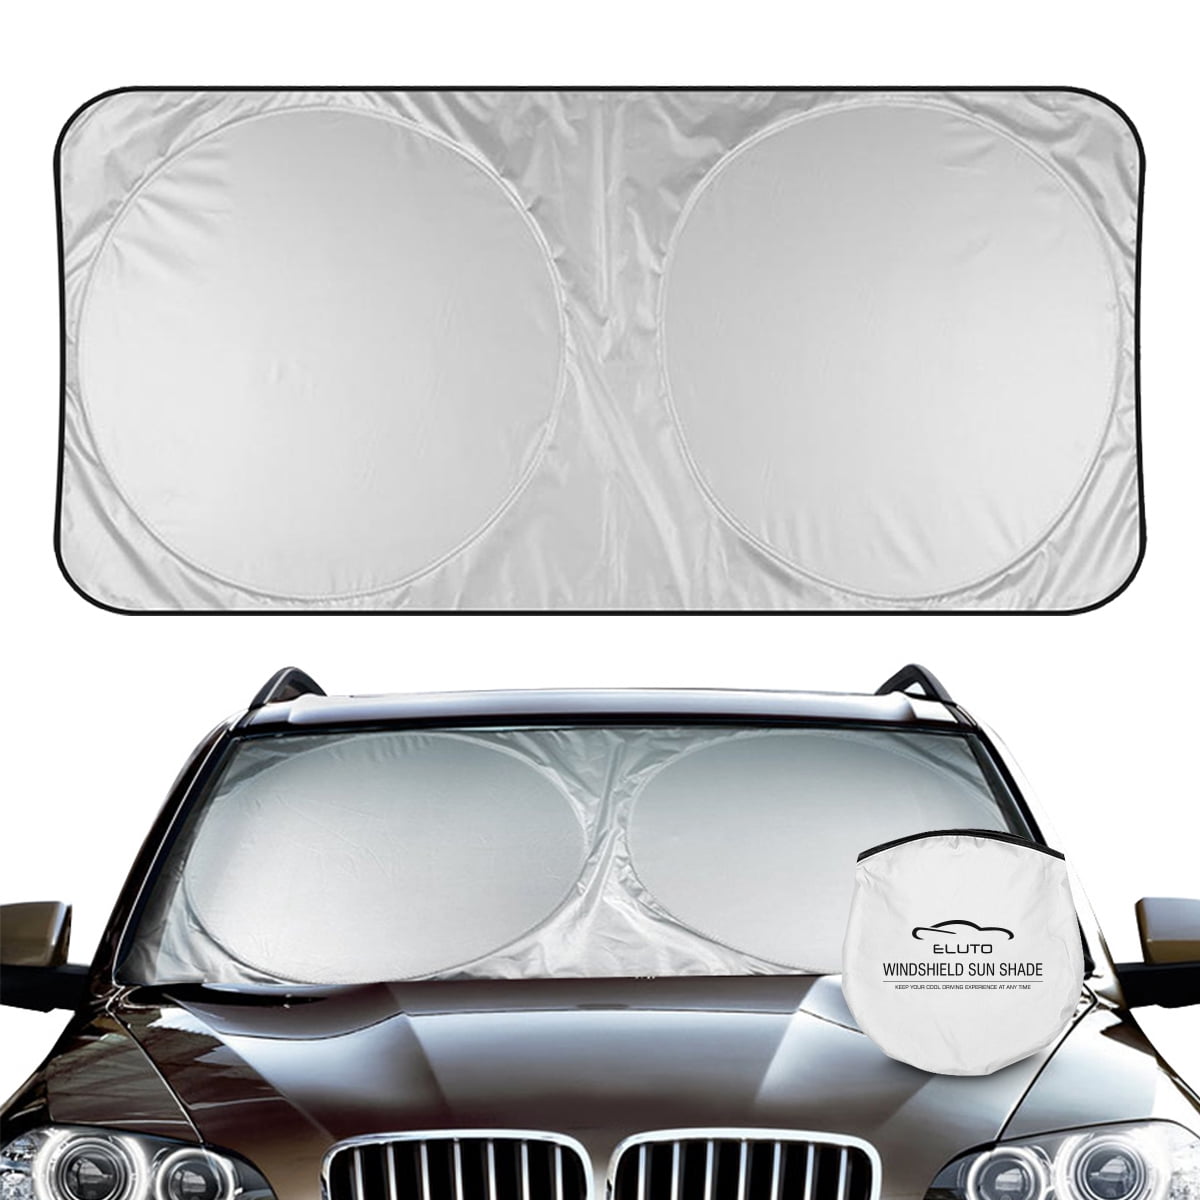 GUIJI Tigger Smile Car Front Windshield Sun Shade,Blocks UV Rays Sun Visor Protector Cover Universal for Car SUV Truck,Keep Your Vehicle Cool and Damage Free 